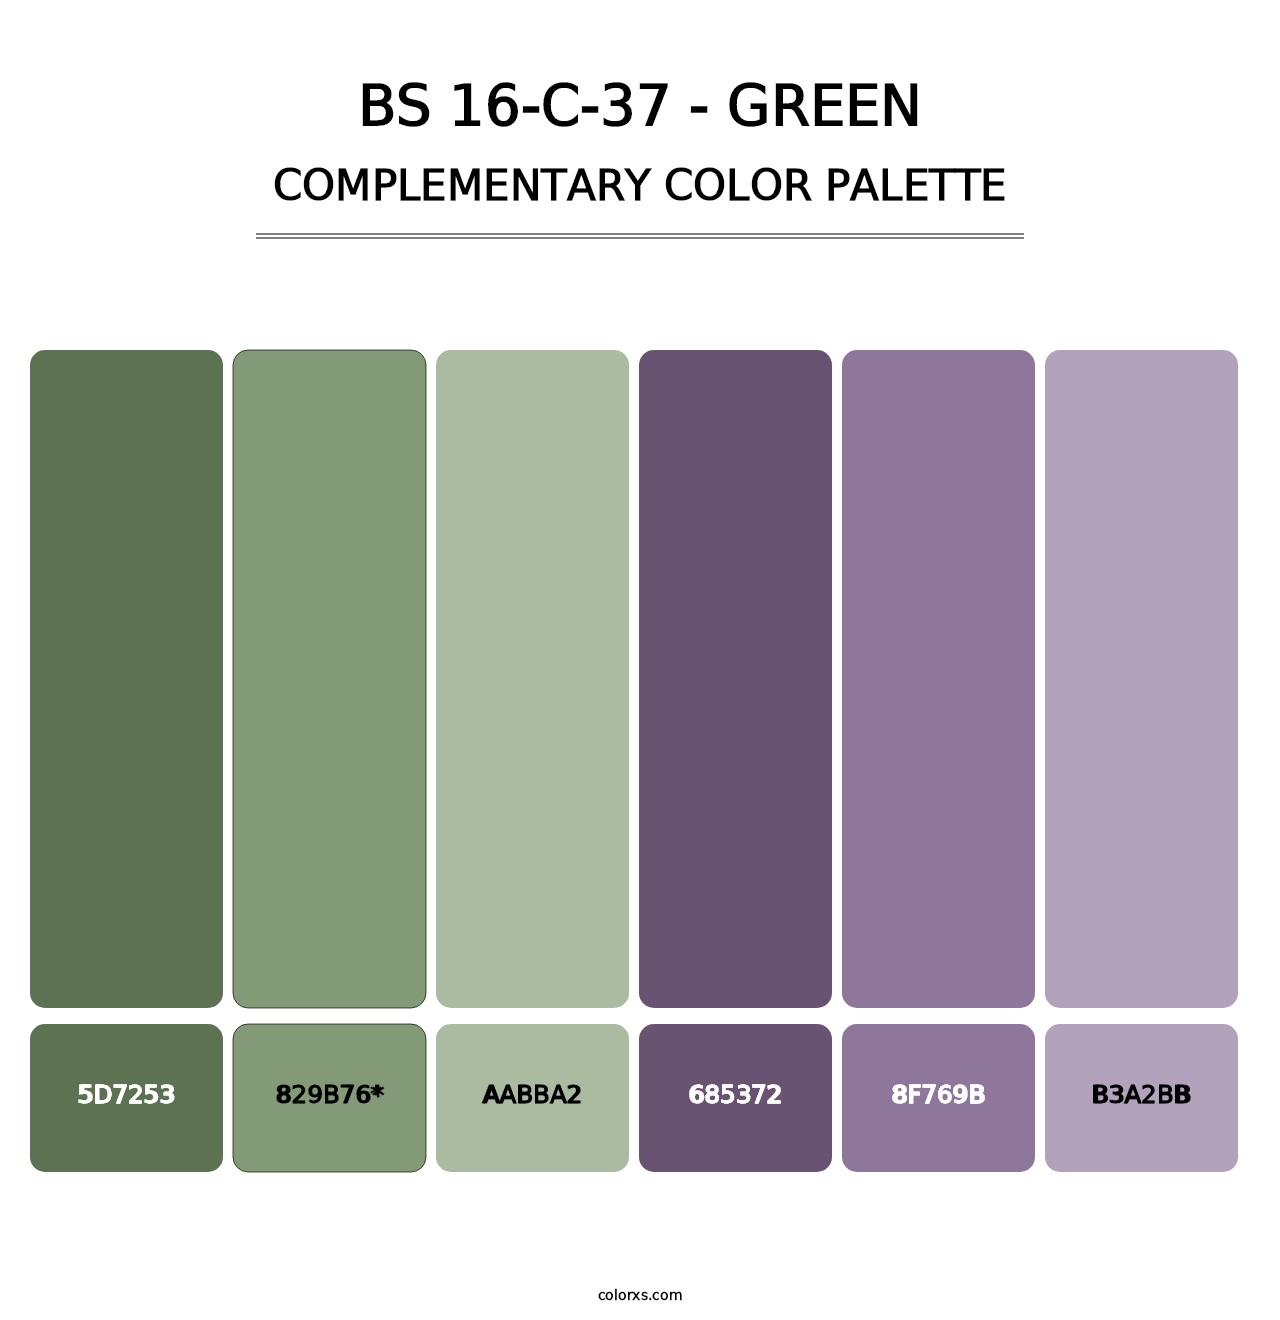 BS 16-C-37 - Green - Complementary Color Palette